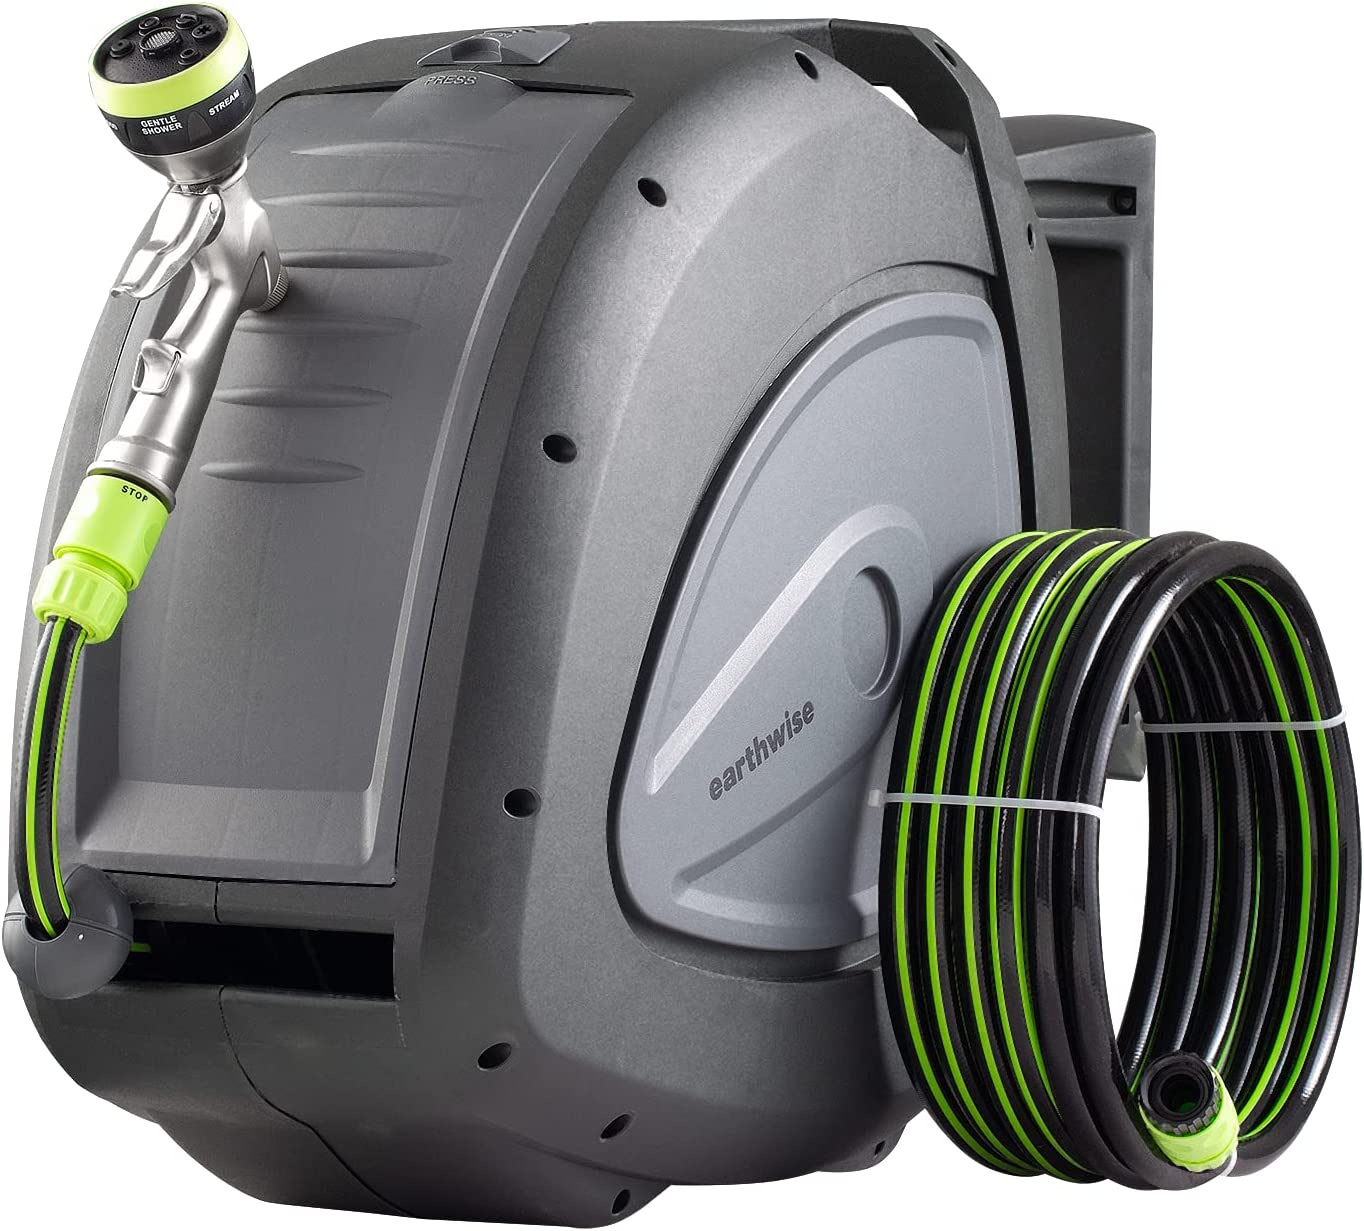 Earthwise 130' Automatic Hose Reel with 7-Setting Metal Hose Nozzle –  American Lawn Mower Co. EST 1895